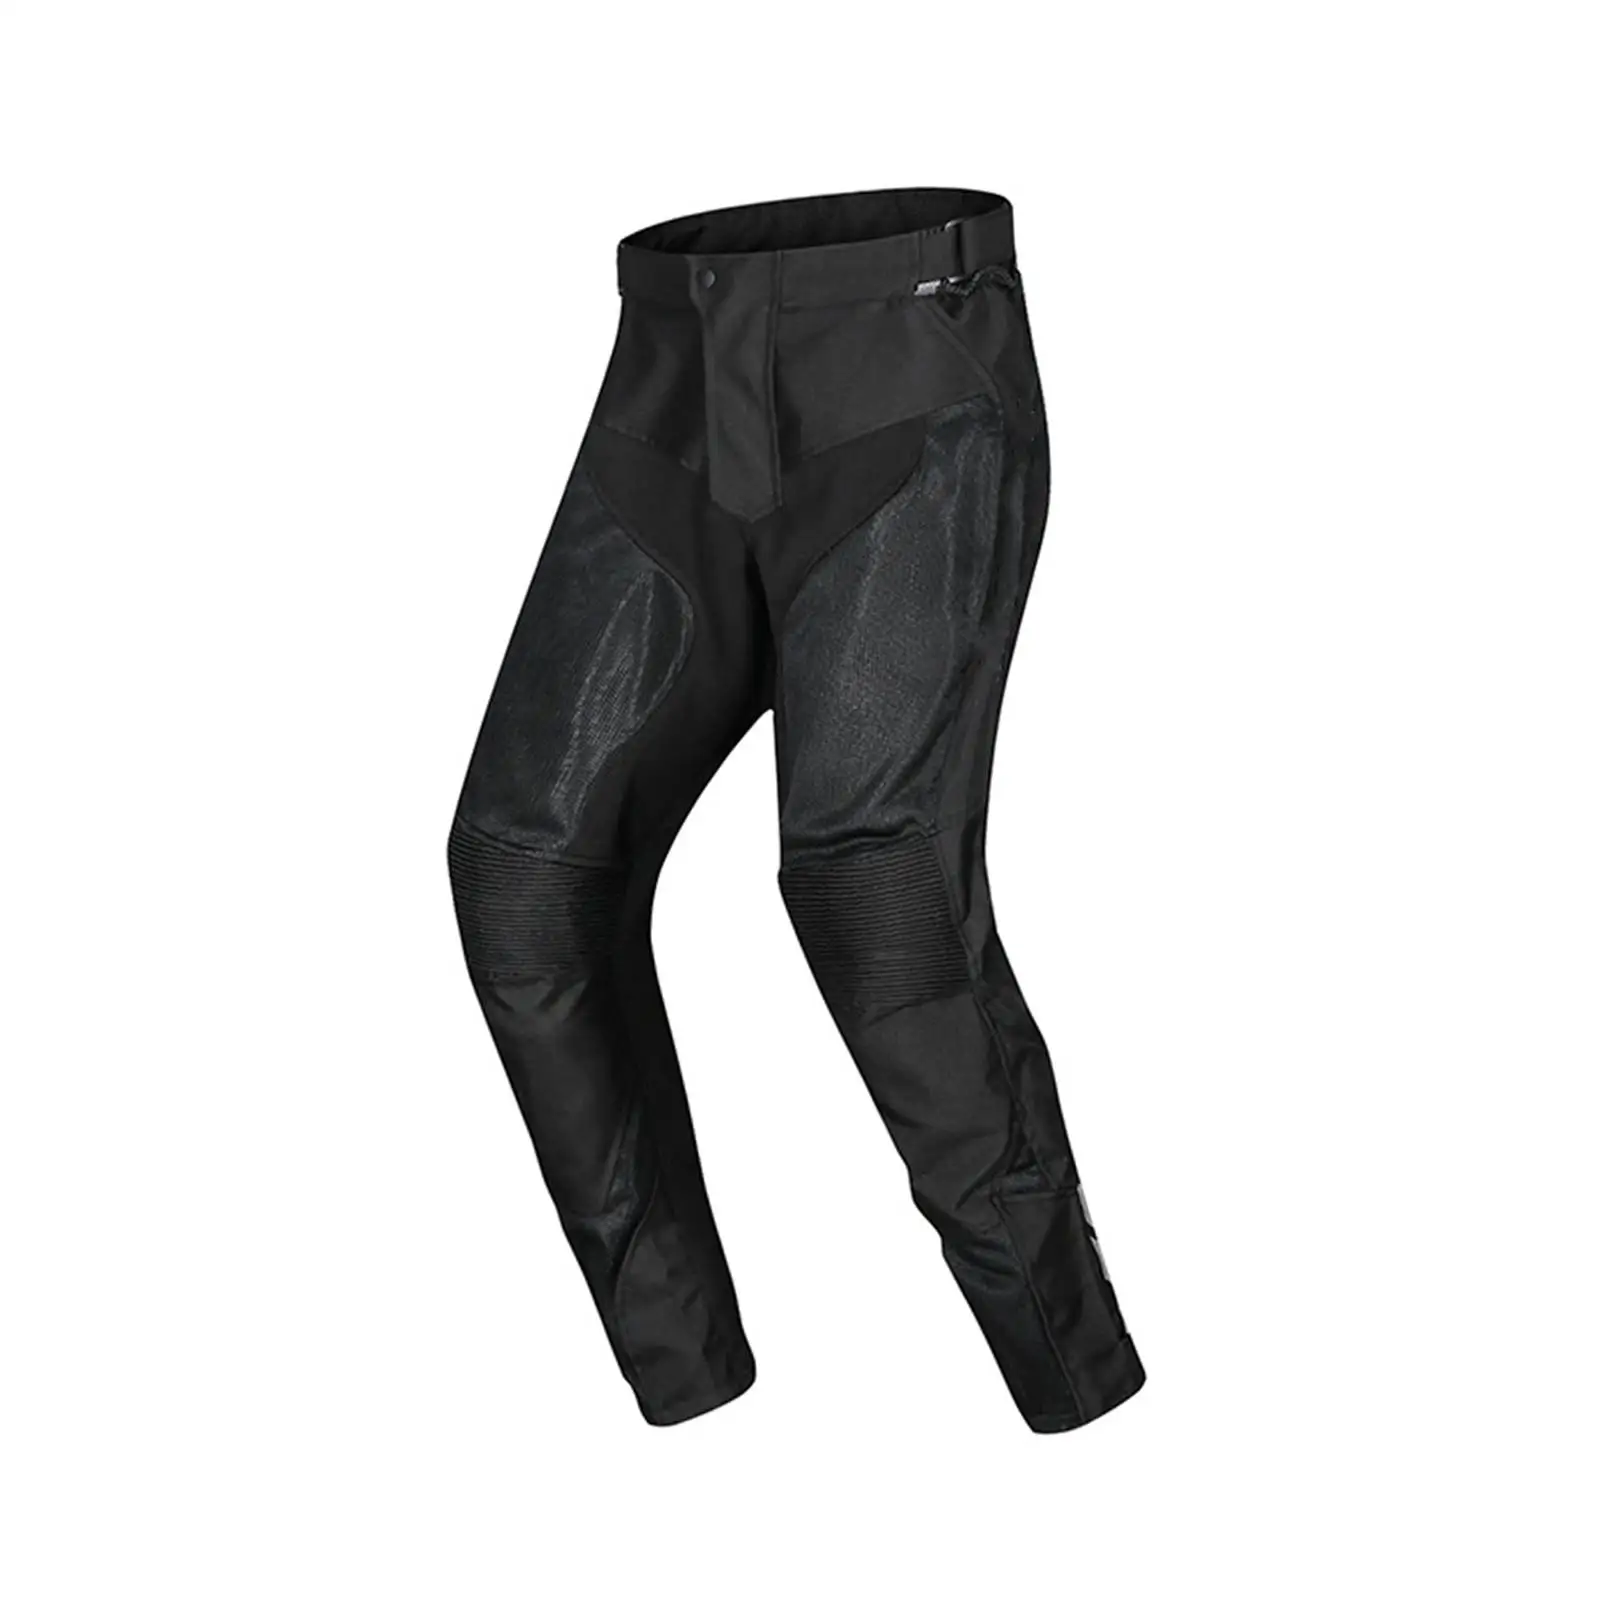 Motorcycle racing pants Protective motorcycle pants for men and women